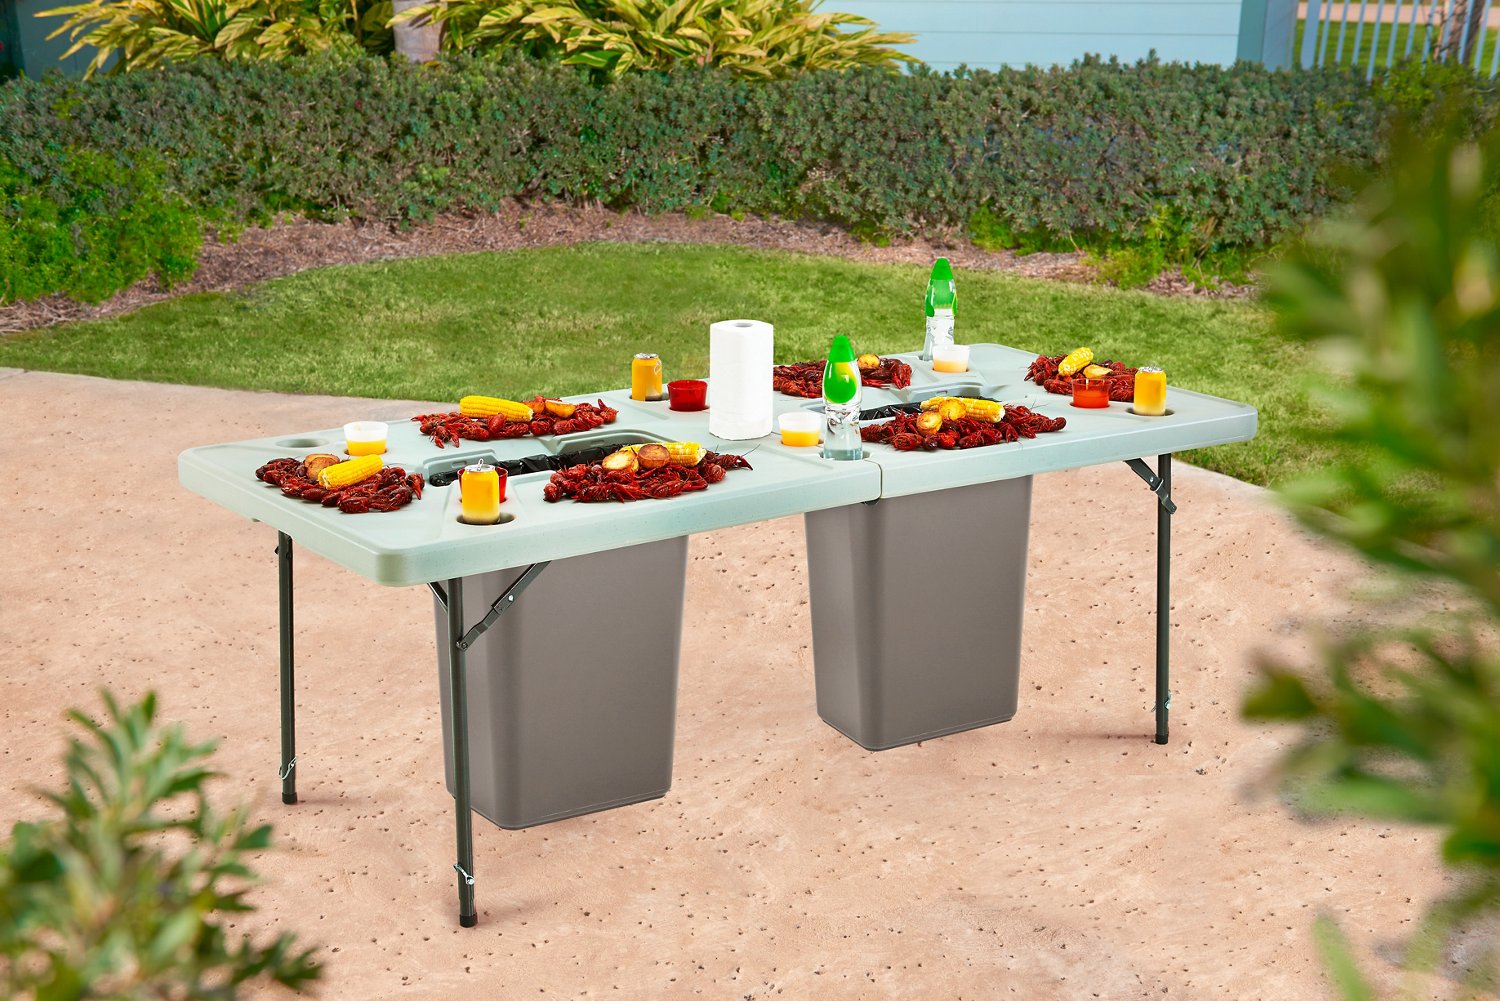 Academy Sports + Outdoors 7 ft Folding Cookout Table                                                                             - view number 9